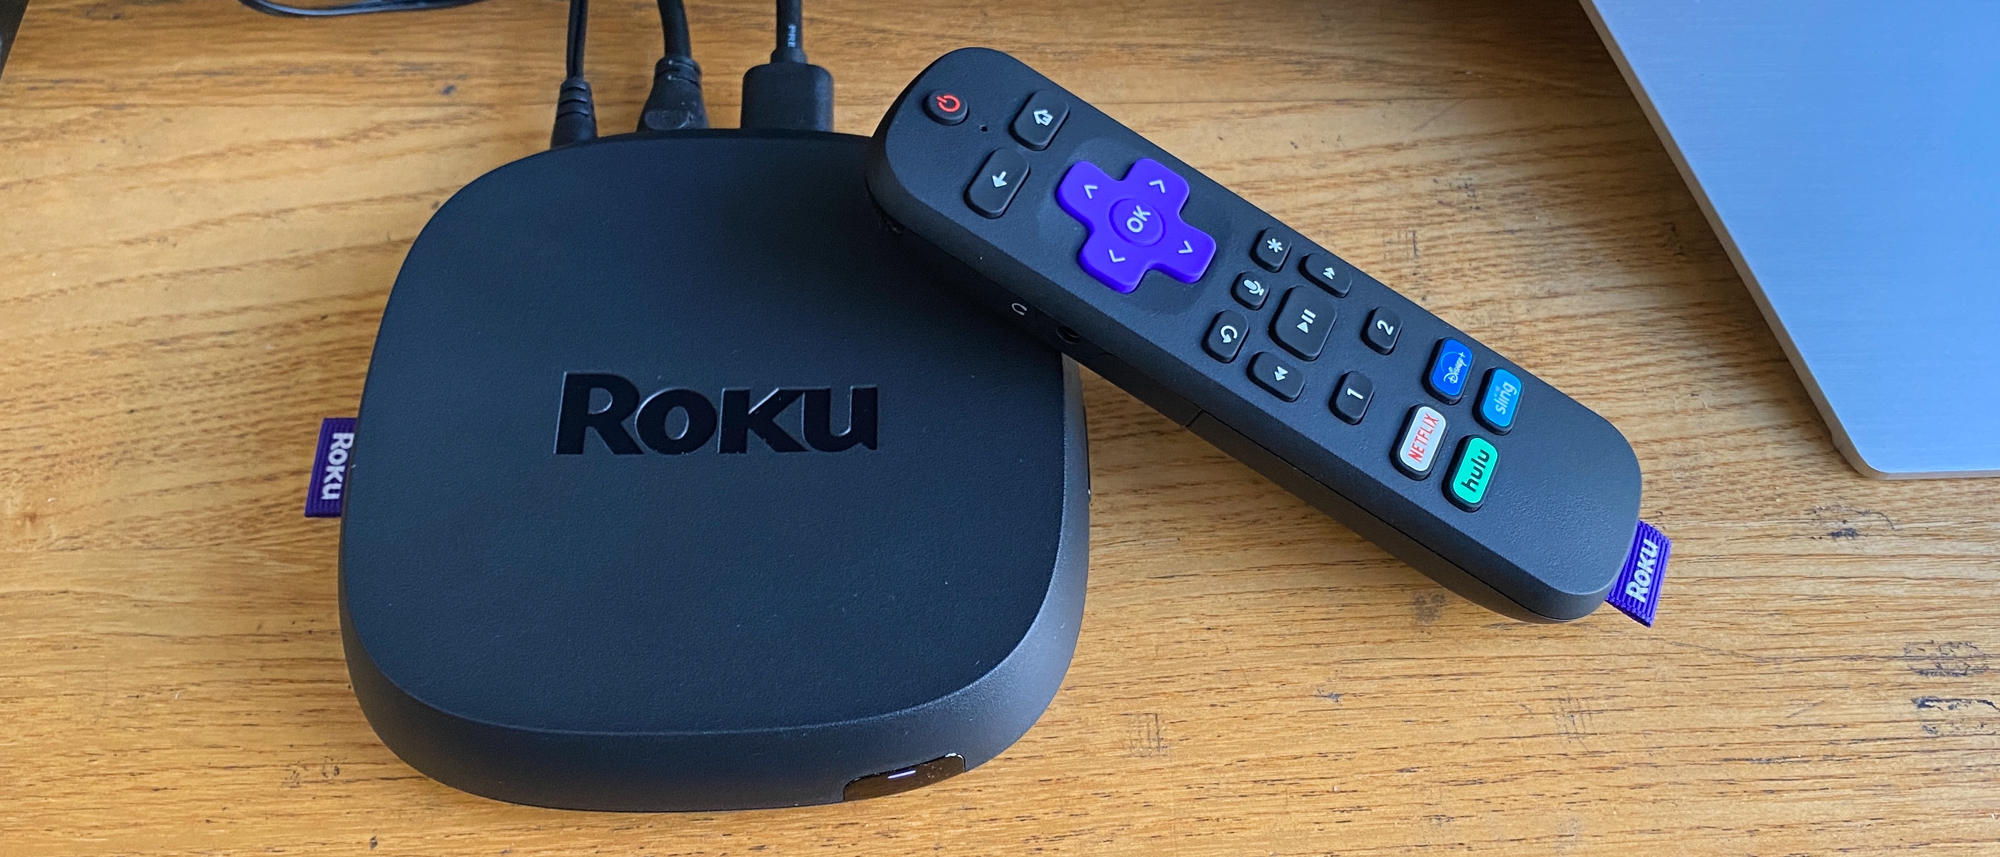 Roku is testing a remote with a built-in battery and customizable buttons